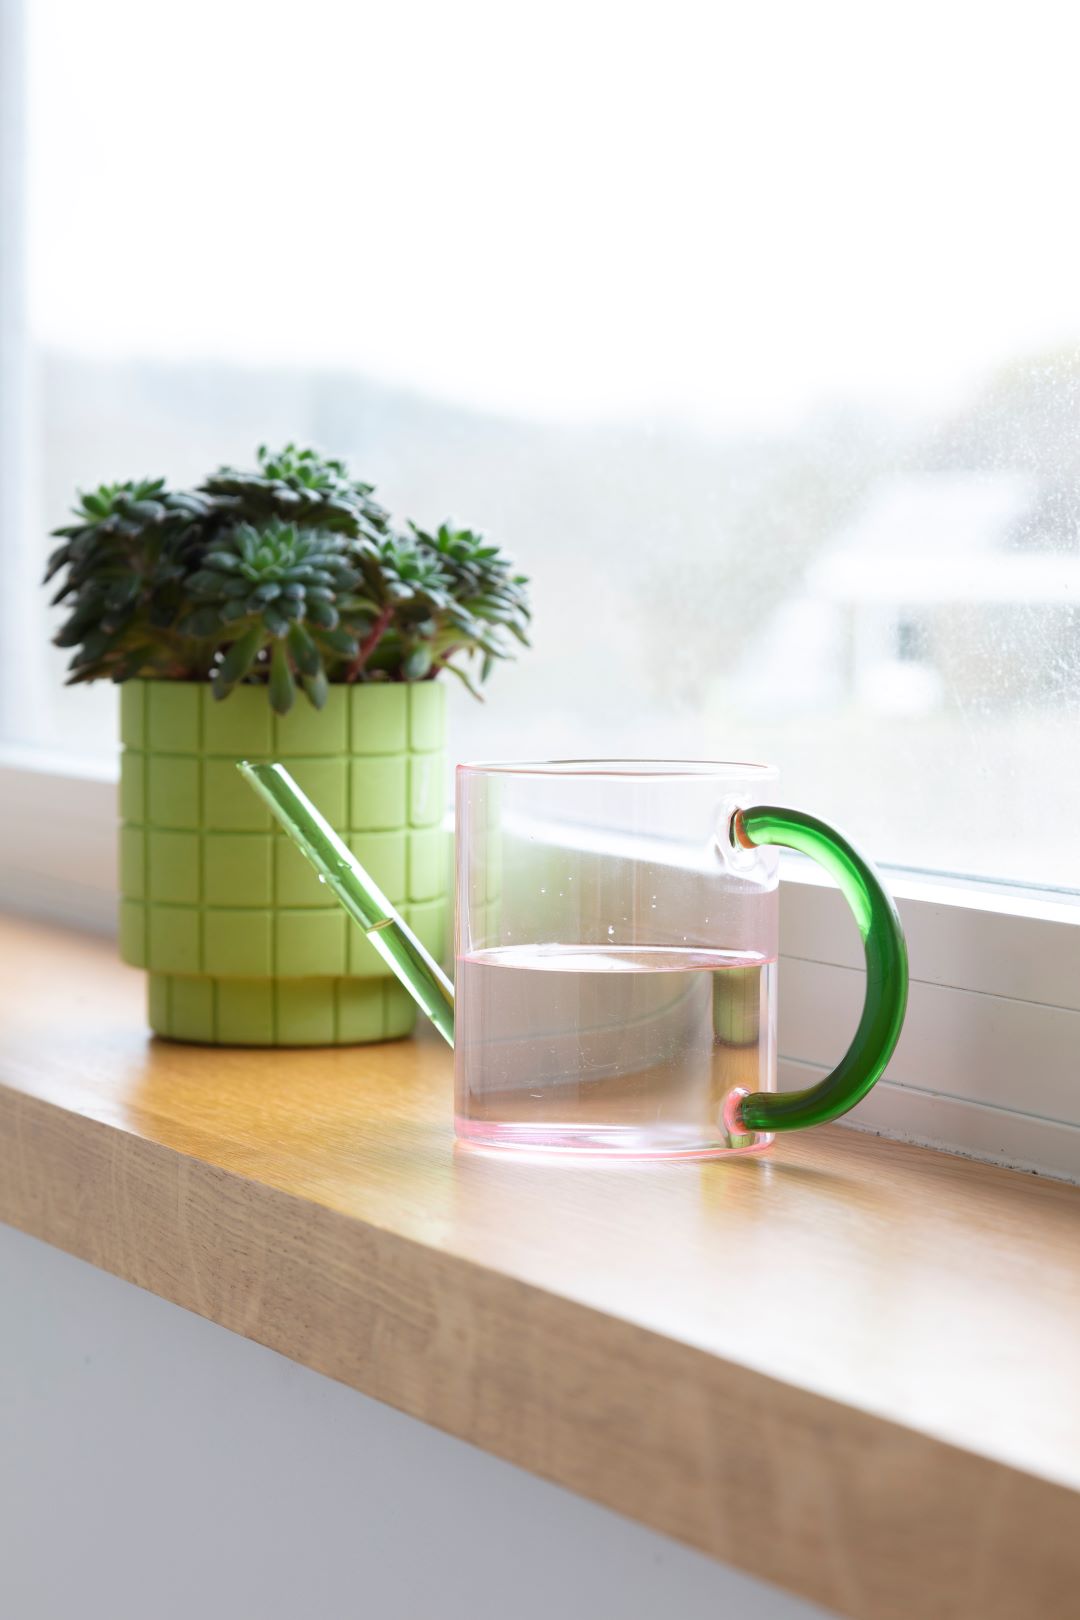 a pink glass watering can with a green handle and spout on a window sill next to a potted plant